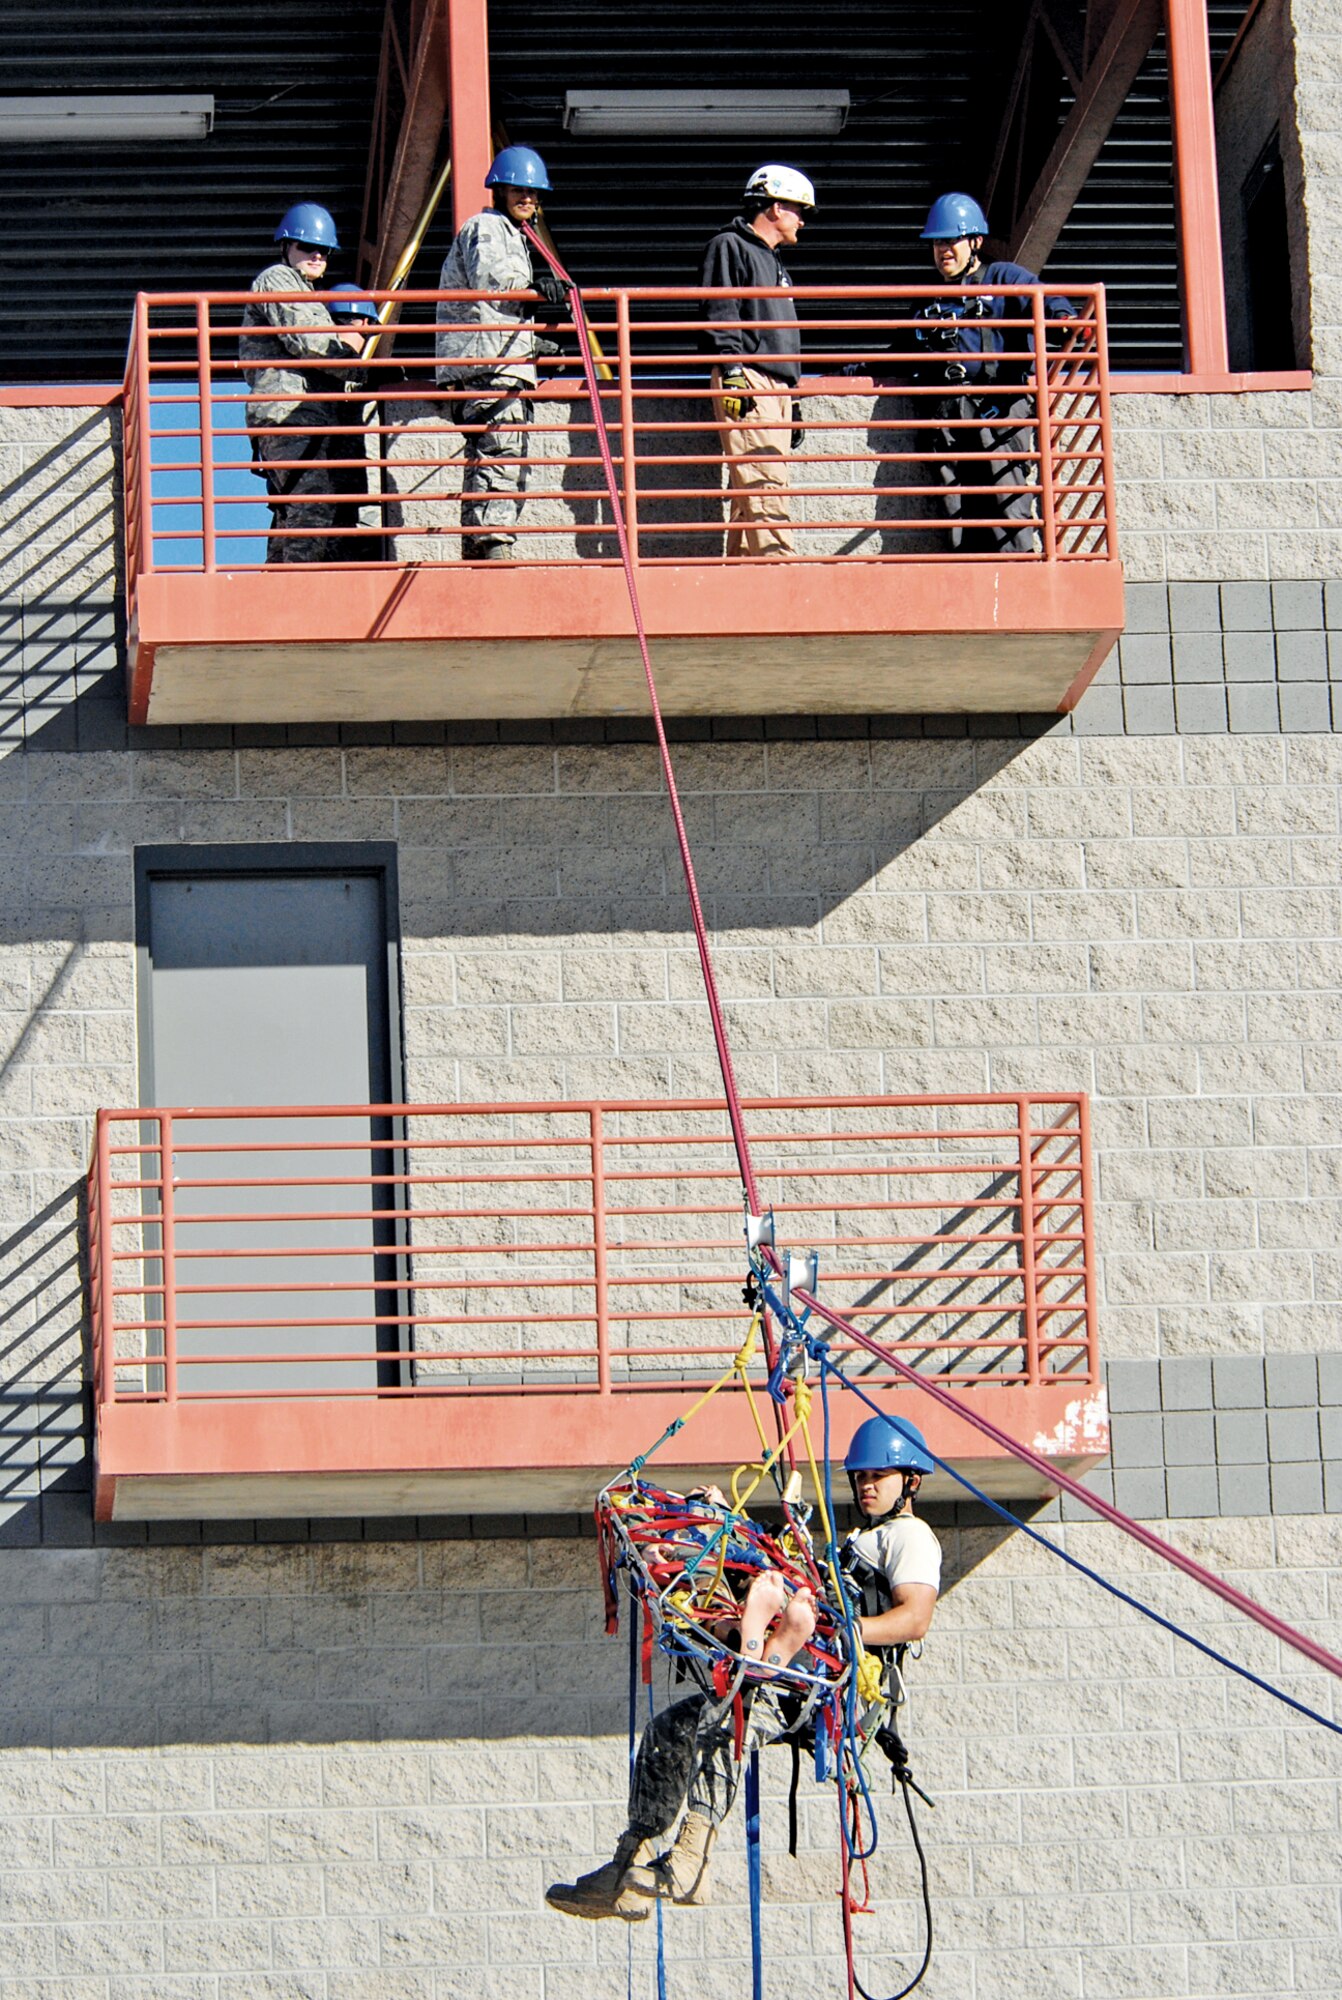 Participants of the Rescue Technician 1 Course perform a high-line operation rescue Jan. 20th held at the Glendale Regional Public Safety Training Center.  (U.S. Air Force photo/Airman 1st Class Sandra Welch)